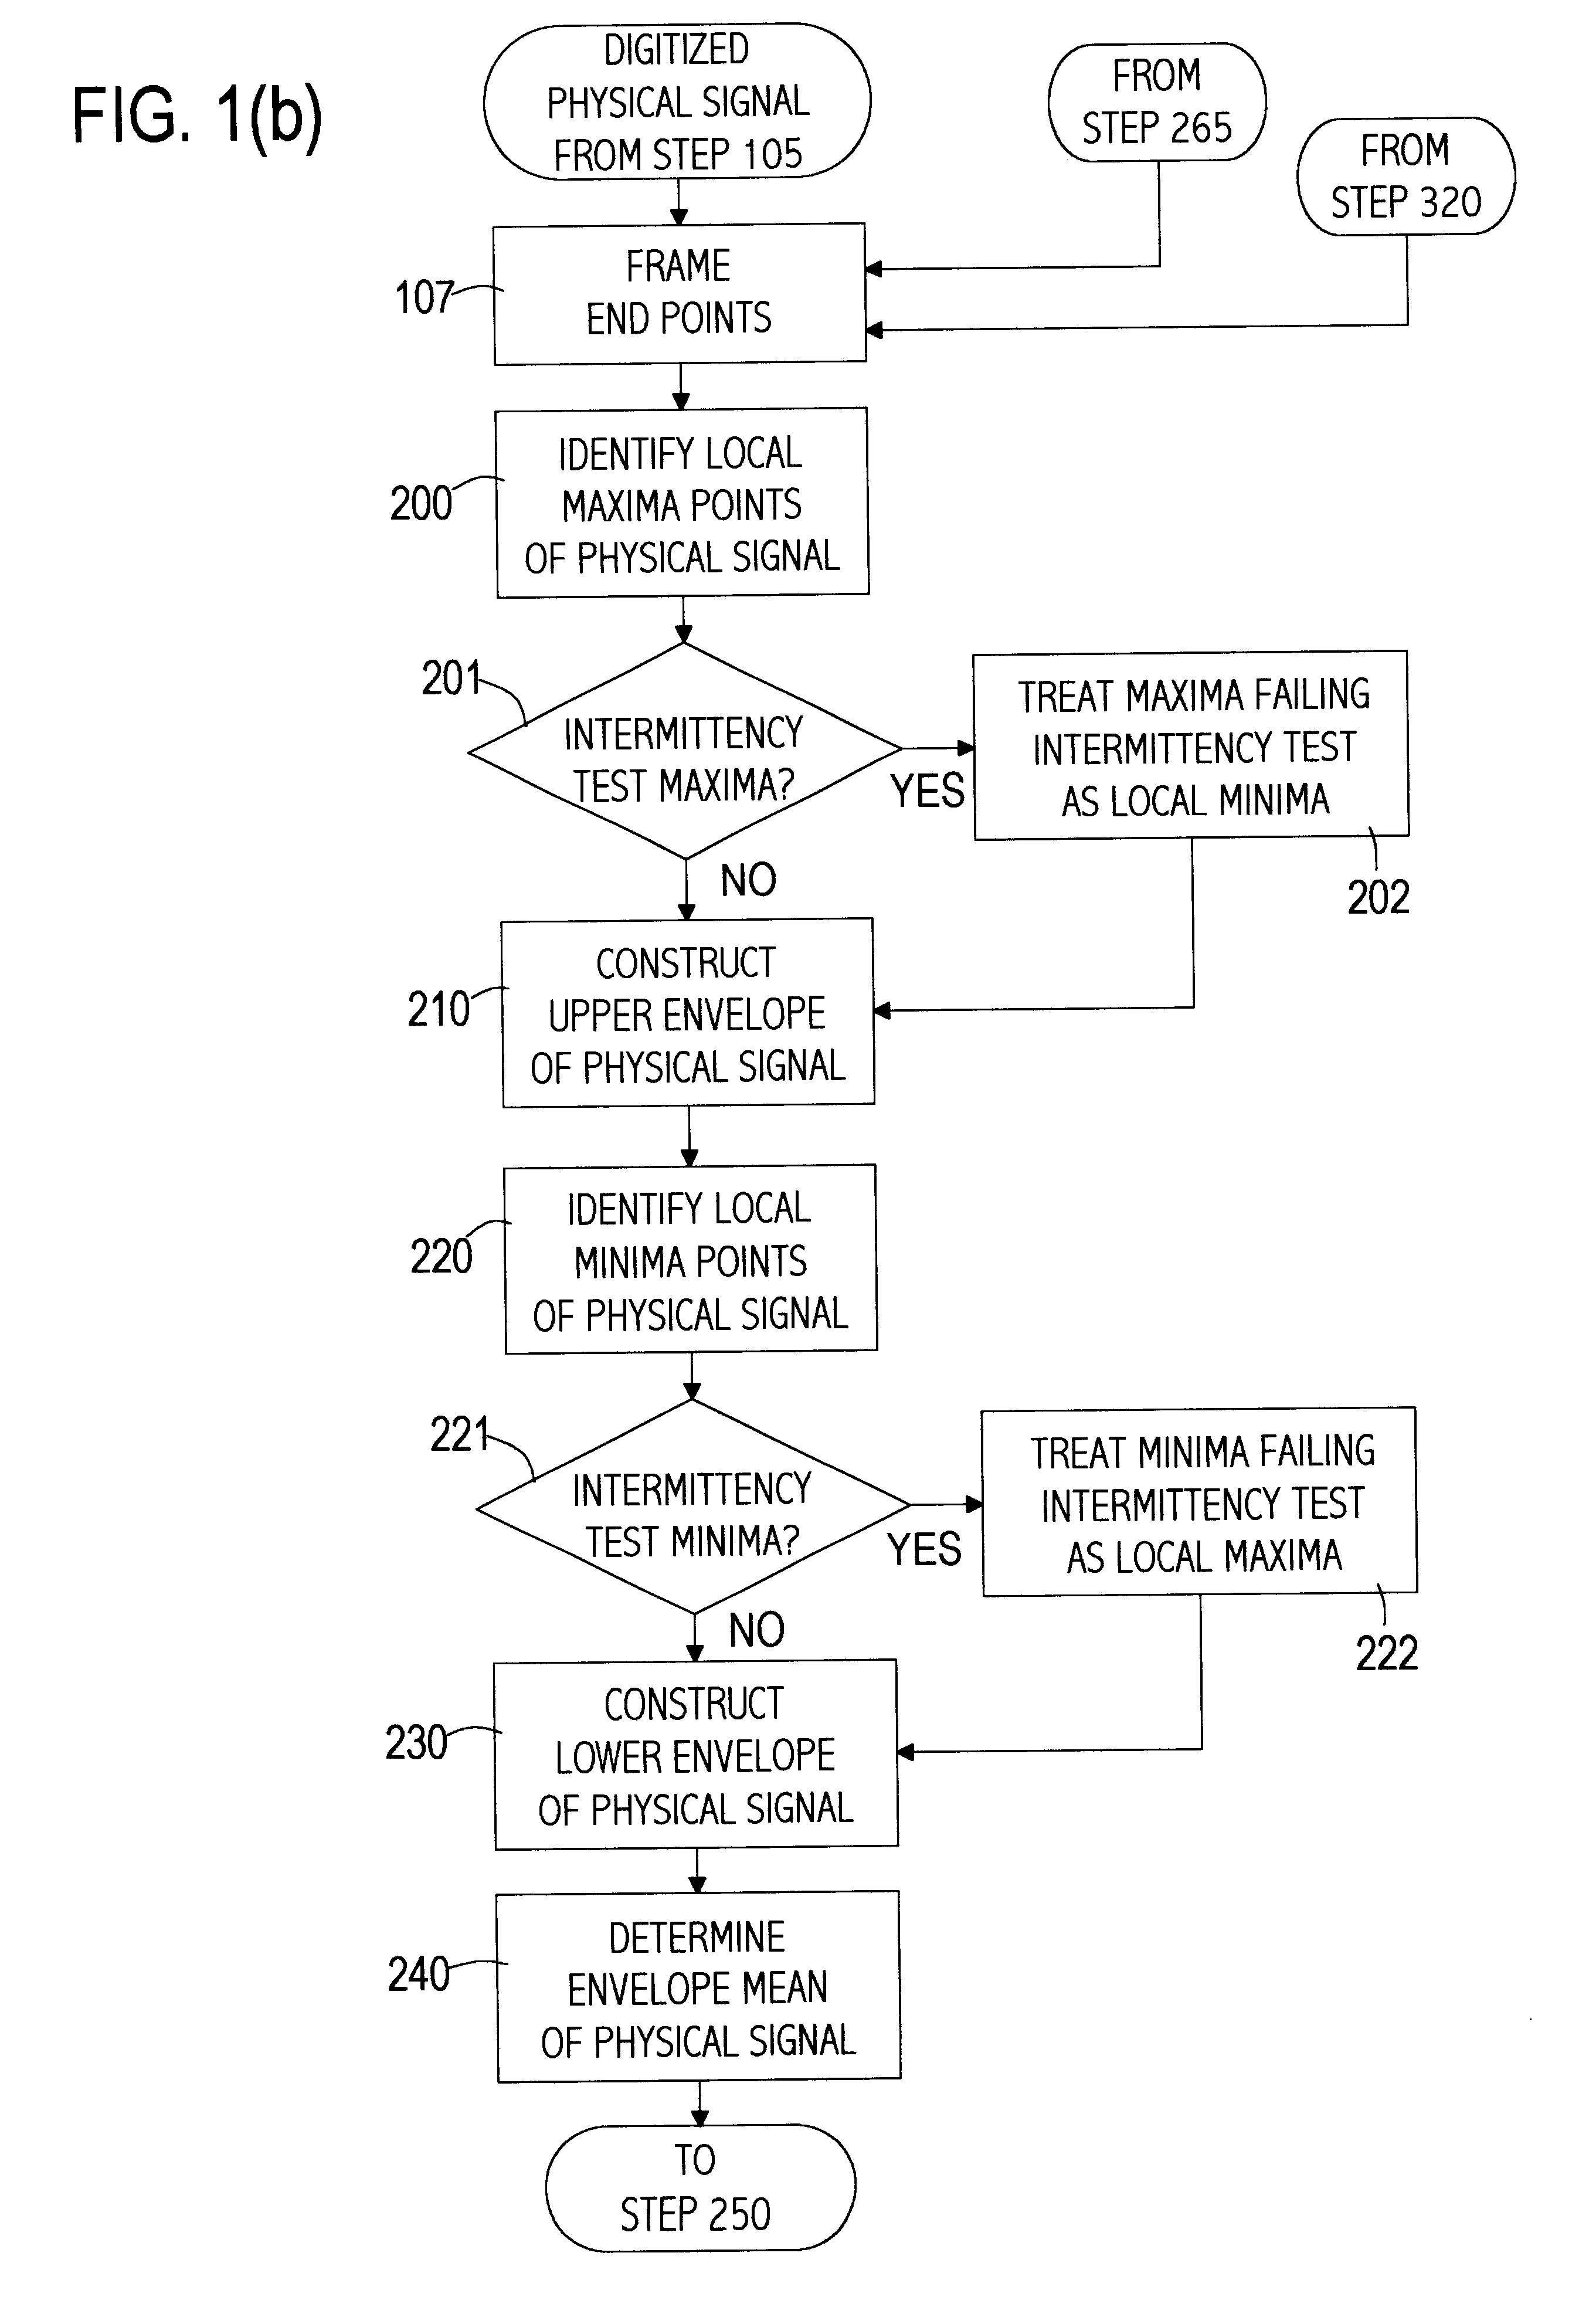 Empirical mode decomposition apparatus, method and article of manufacture for analyzing biological signals and performing curve fitting